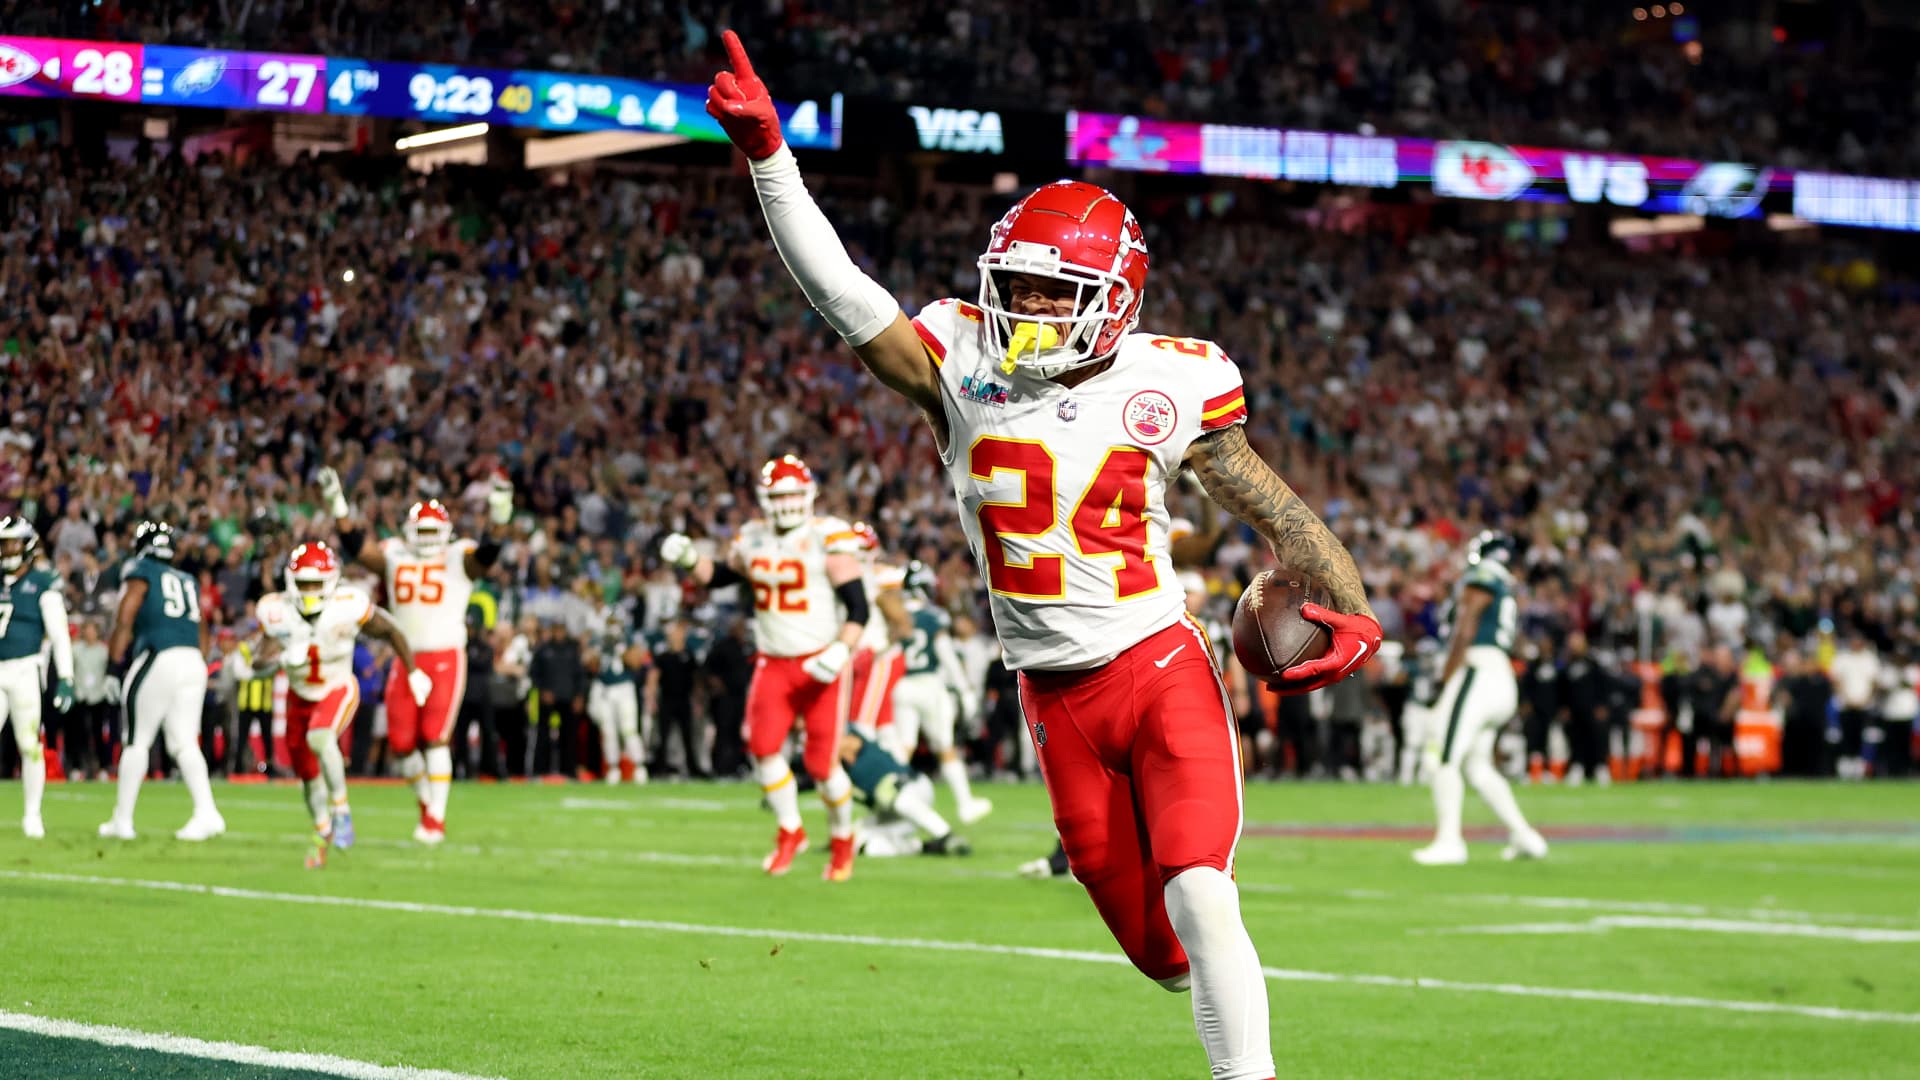 Skyy Moore #24 of the Kansas City Chiefs celebrates after scoring on a 4 yard touchdown pass during the third quarter against the Philadelphia Eagles in Super Bowl LVII at State Farm Stadium on February 12, 2023 in Glendale, Arizona.